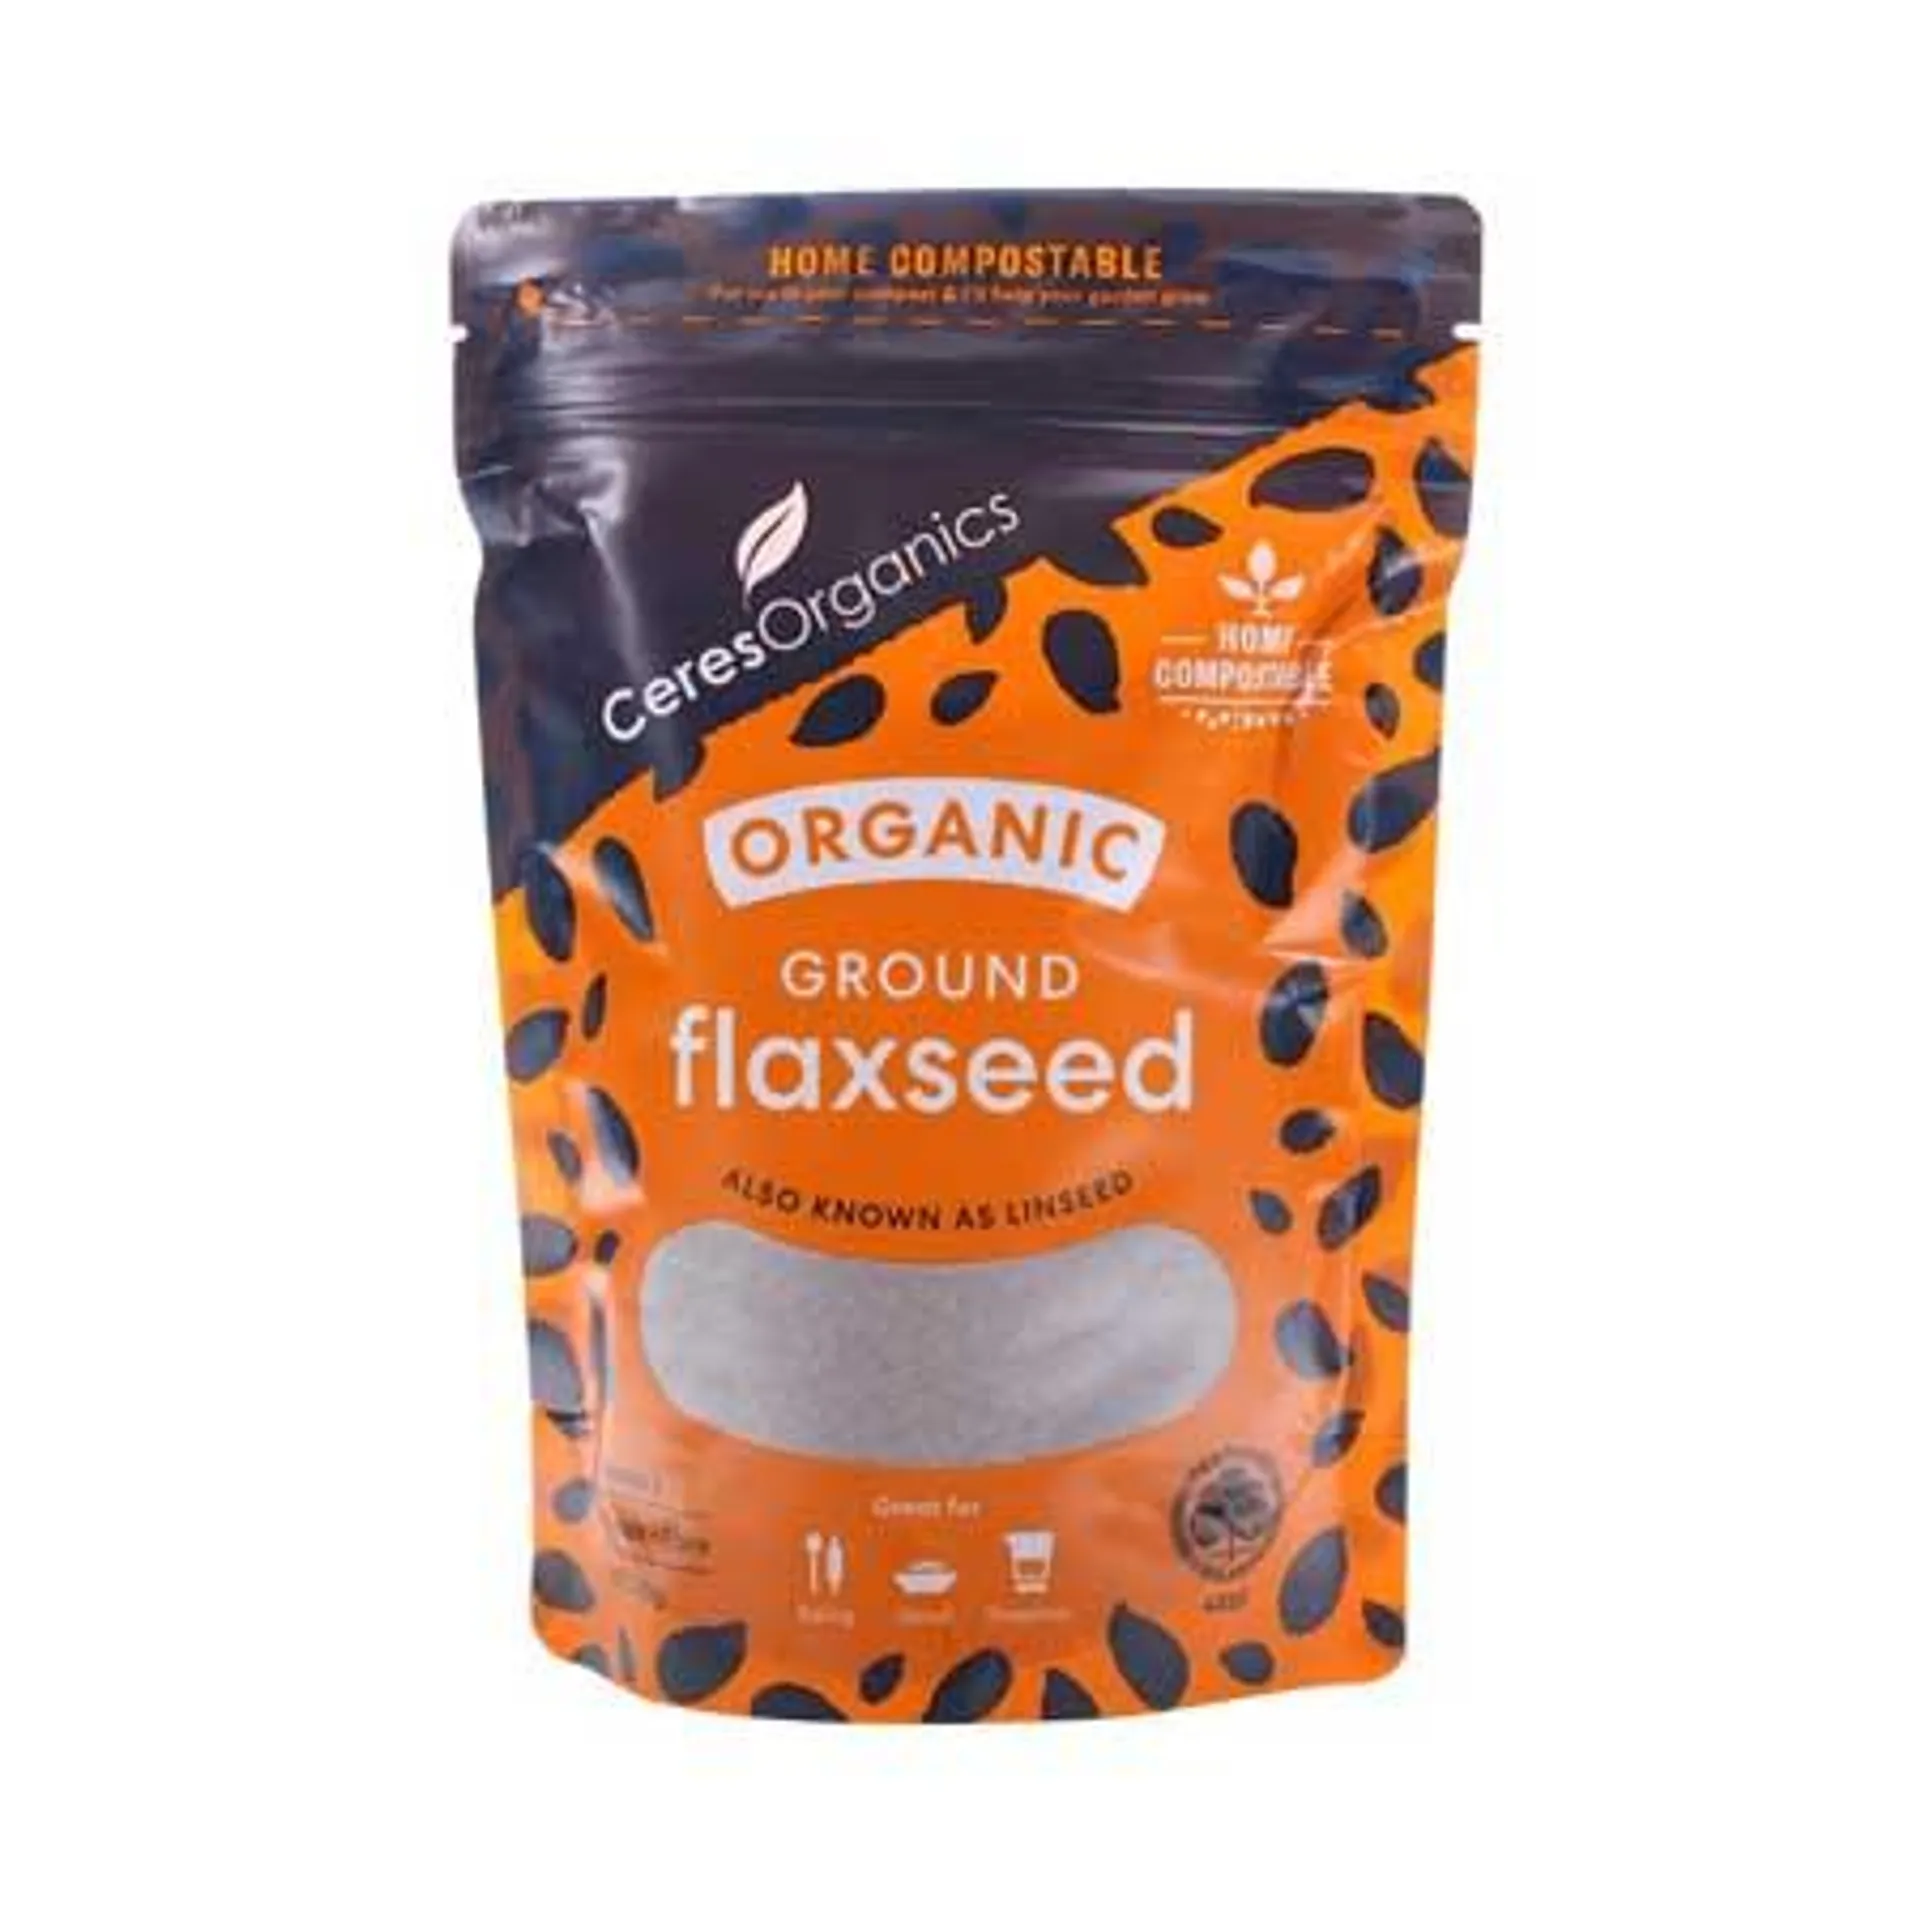 Ceres Ground Flaxseed